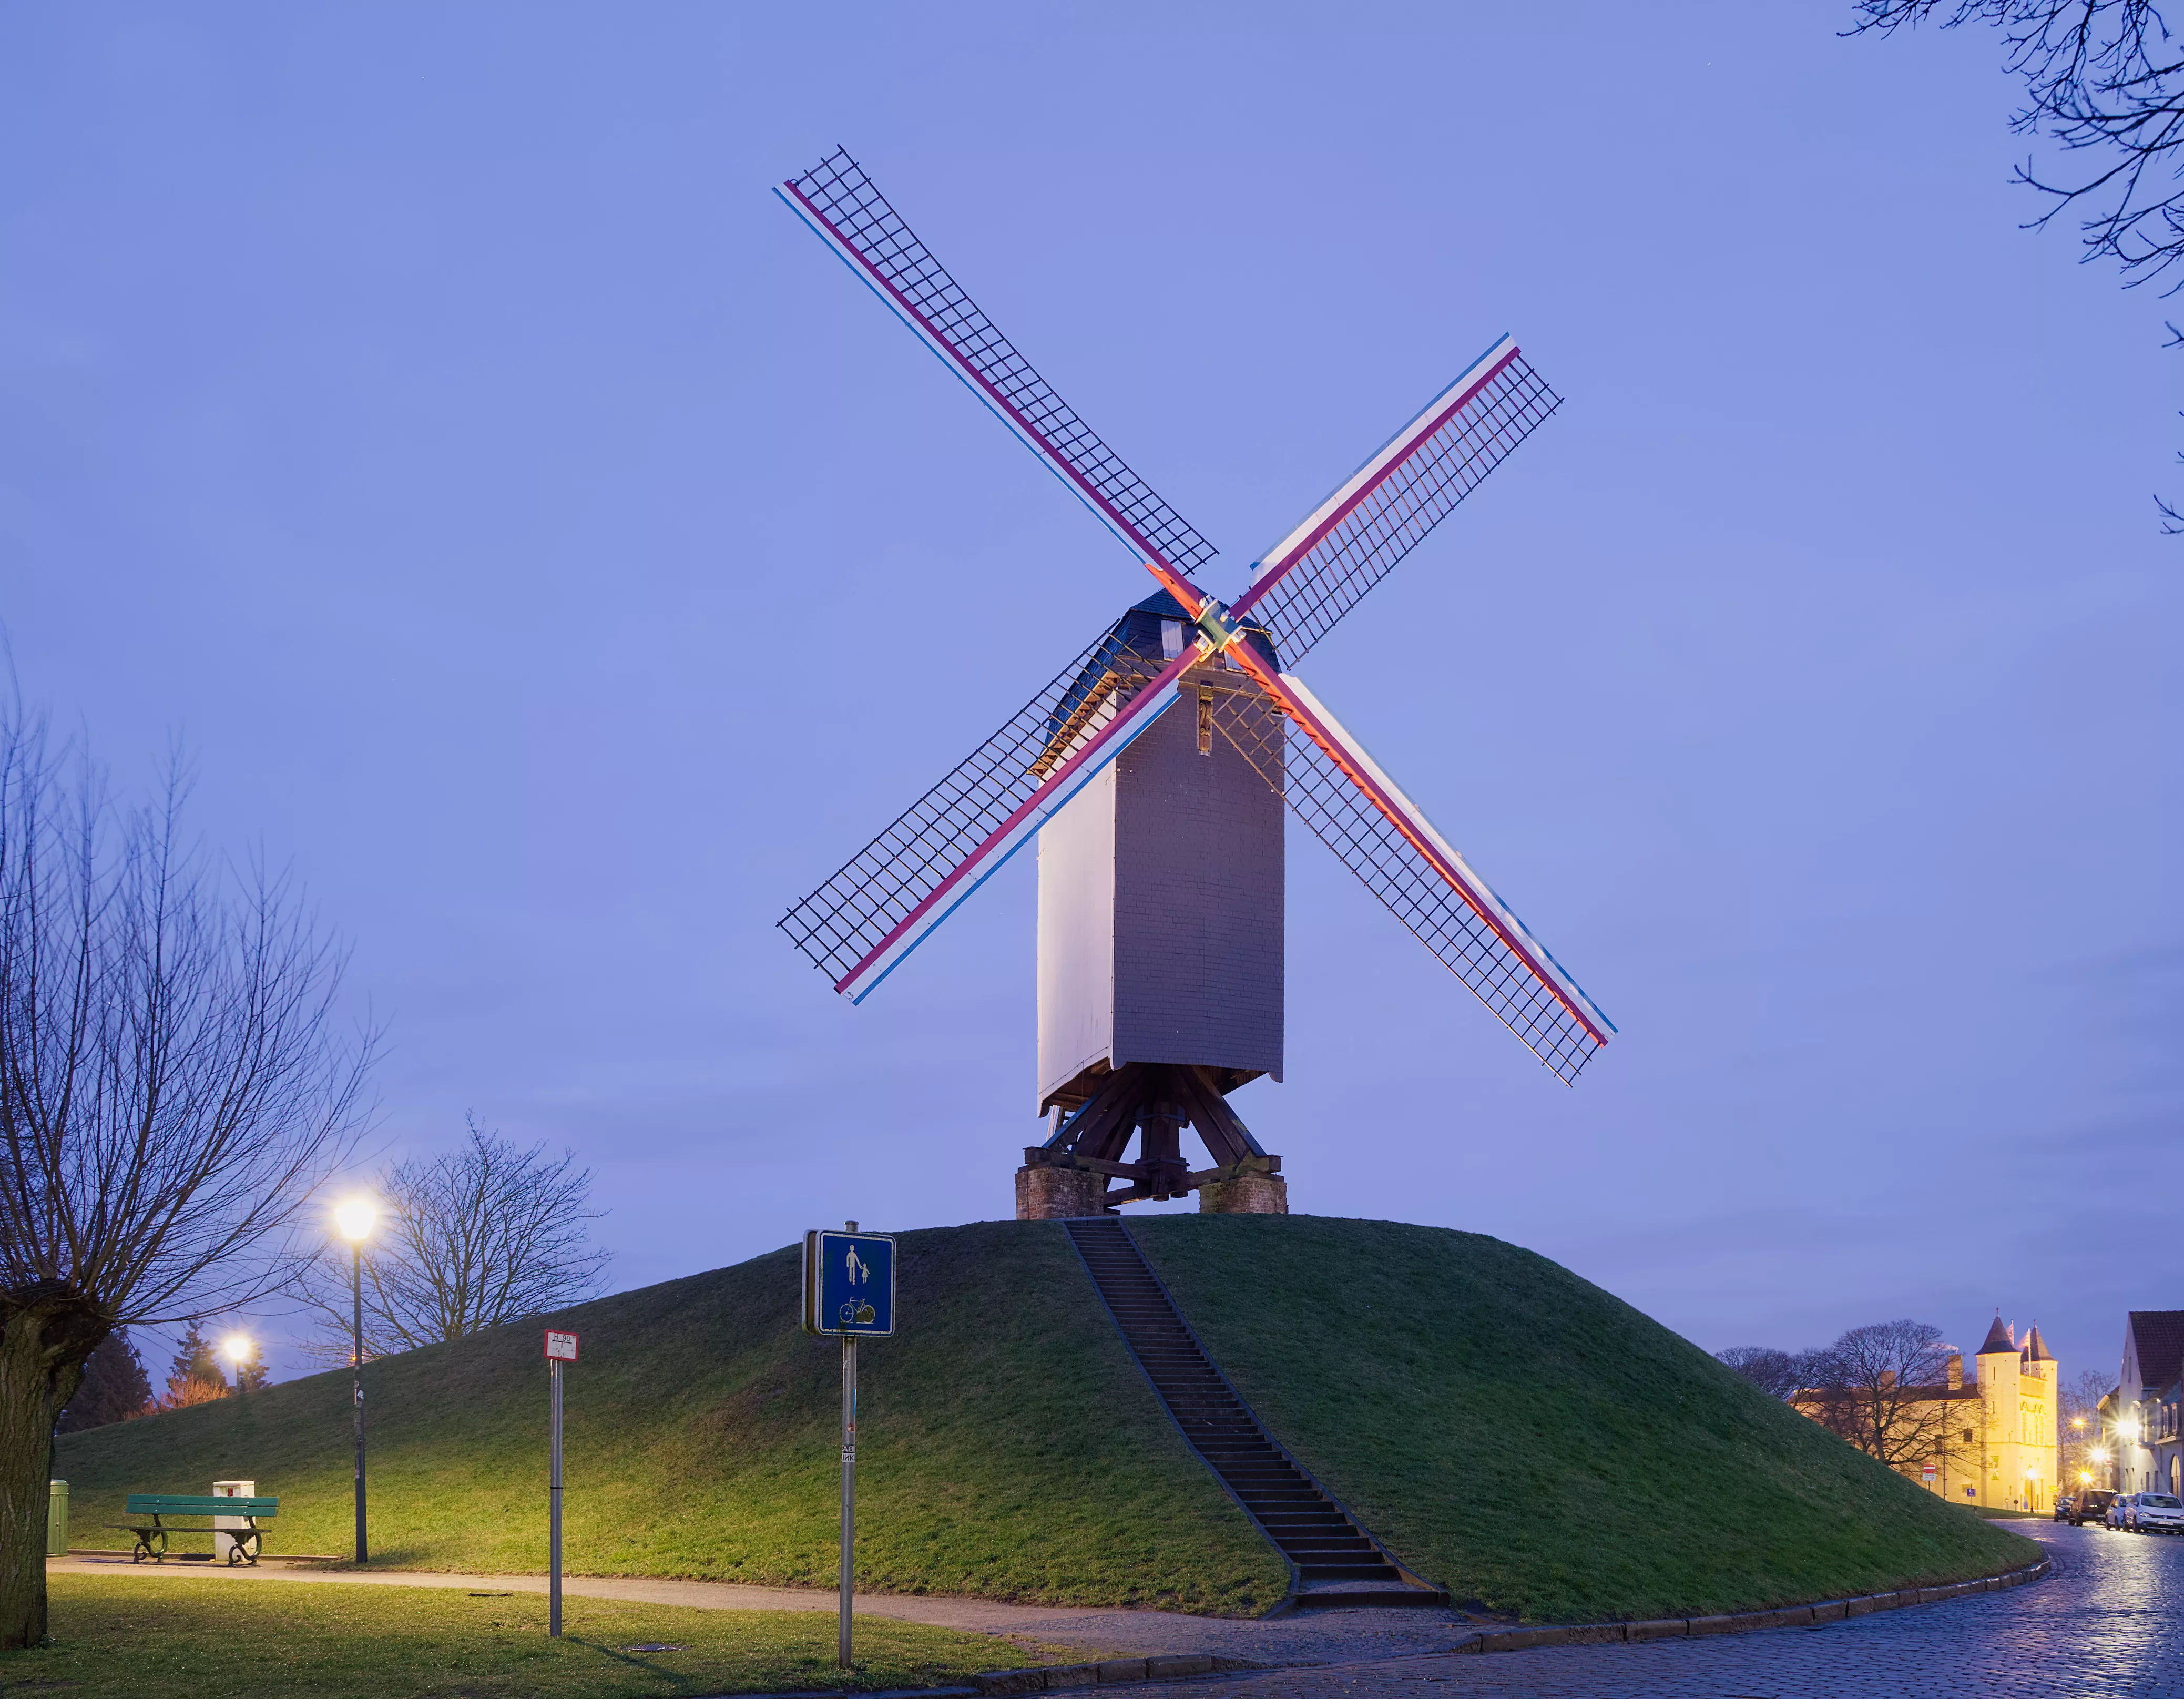 Windmill in Belgium, Europe | Architecture - Rated 0.8